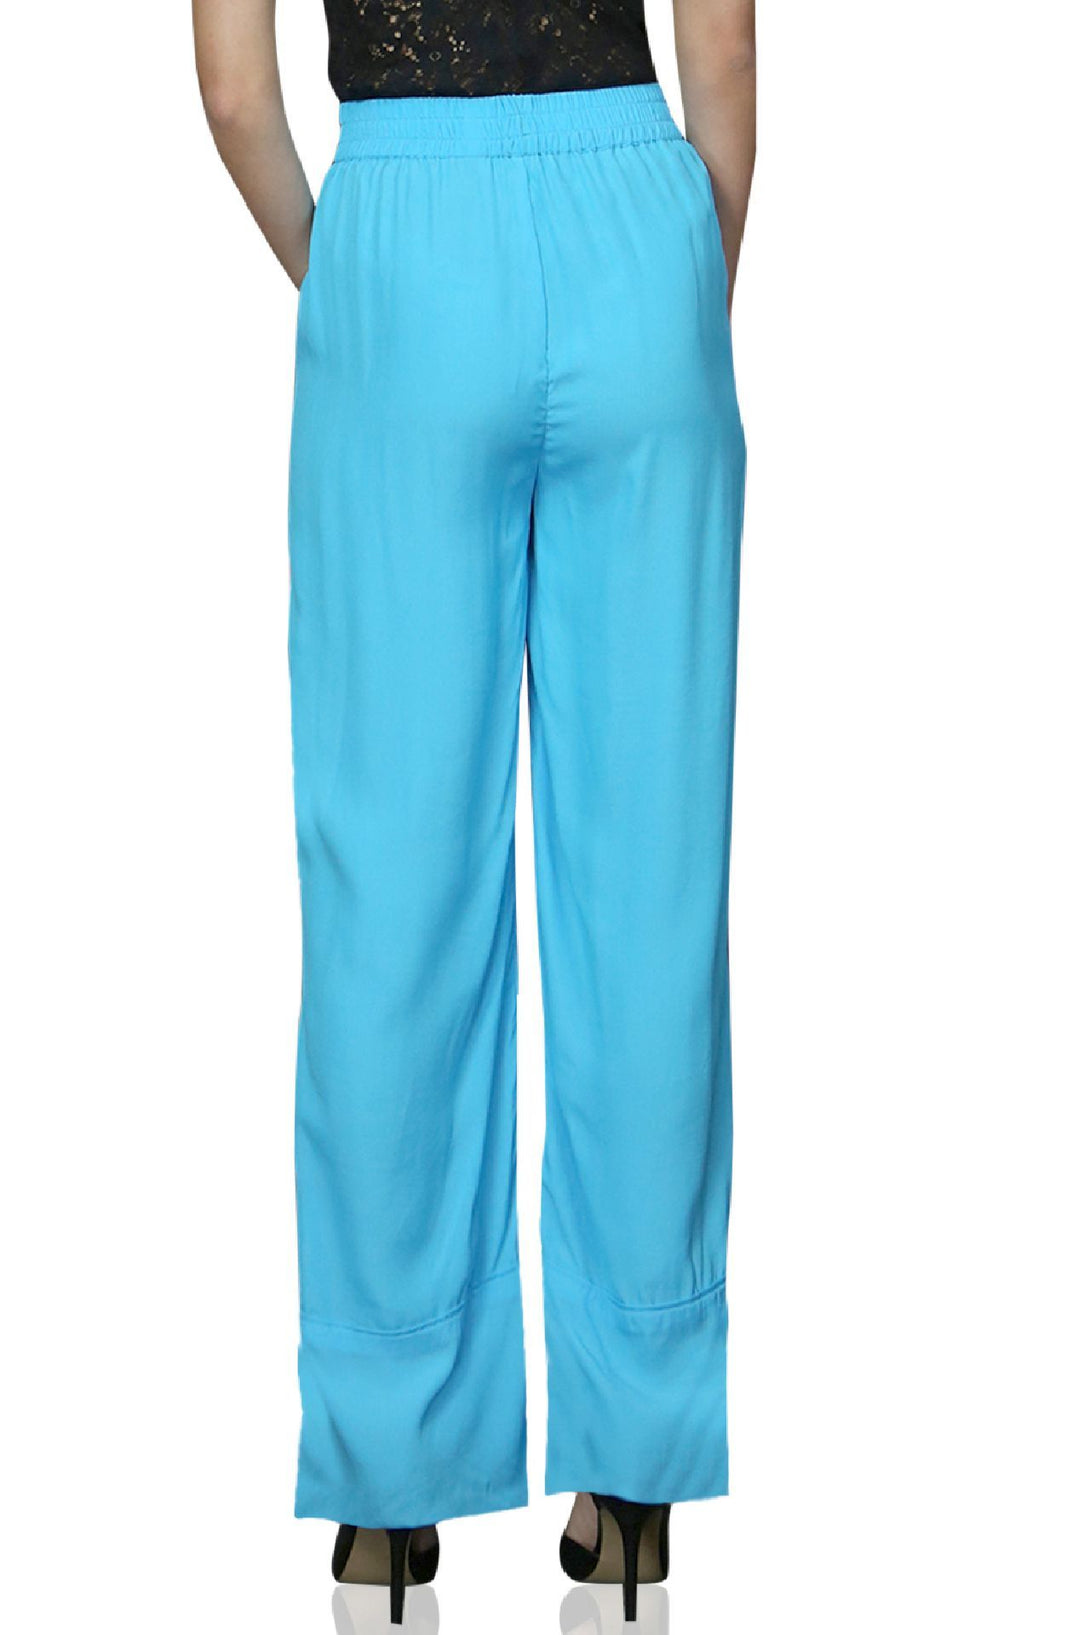 Silk-Solid-Light-Blue-Pants-By-Kyle-Richards